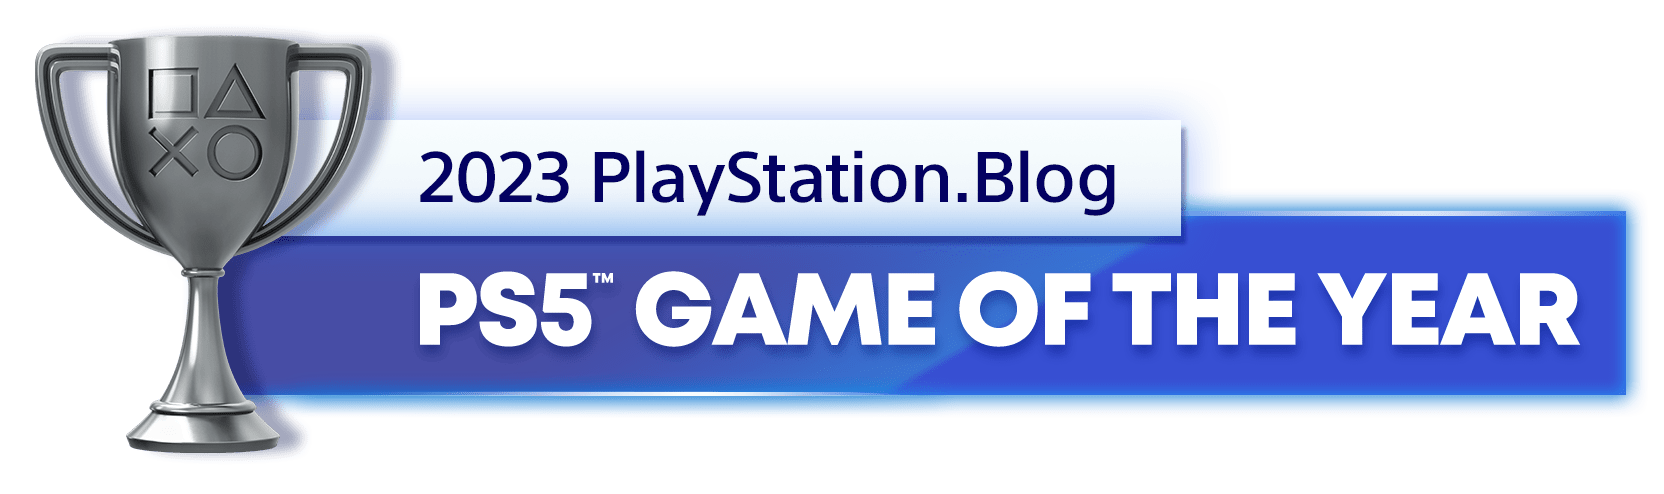 Silver Trophy for the 2023 PlayStation Blog PS5 Game of the Year Winner